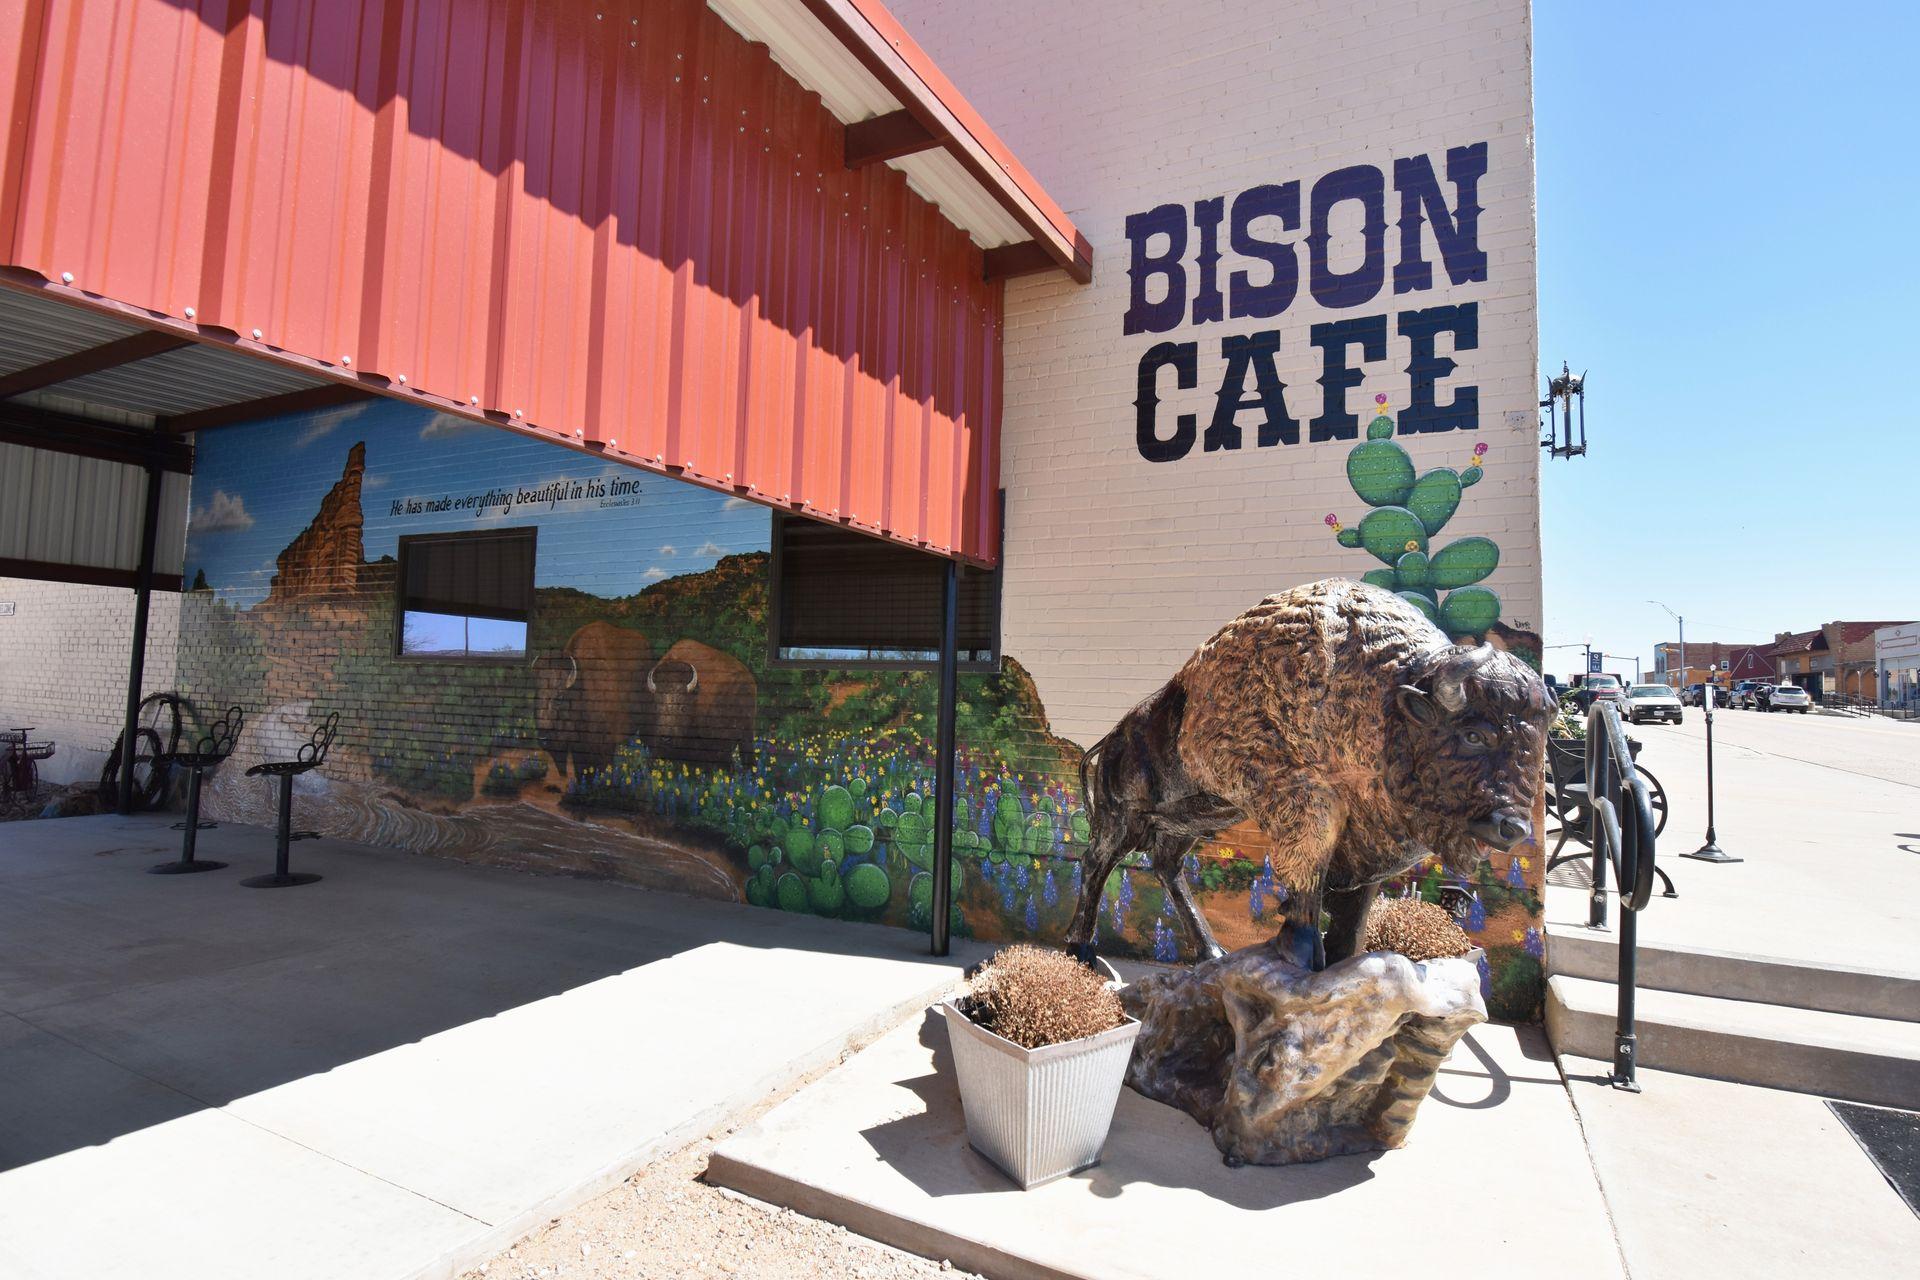 A bison statue in front of a buildng labeled "Bison Cafe." On the building is a mural painted with cacti and bison.